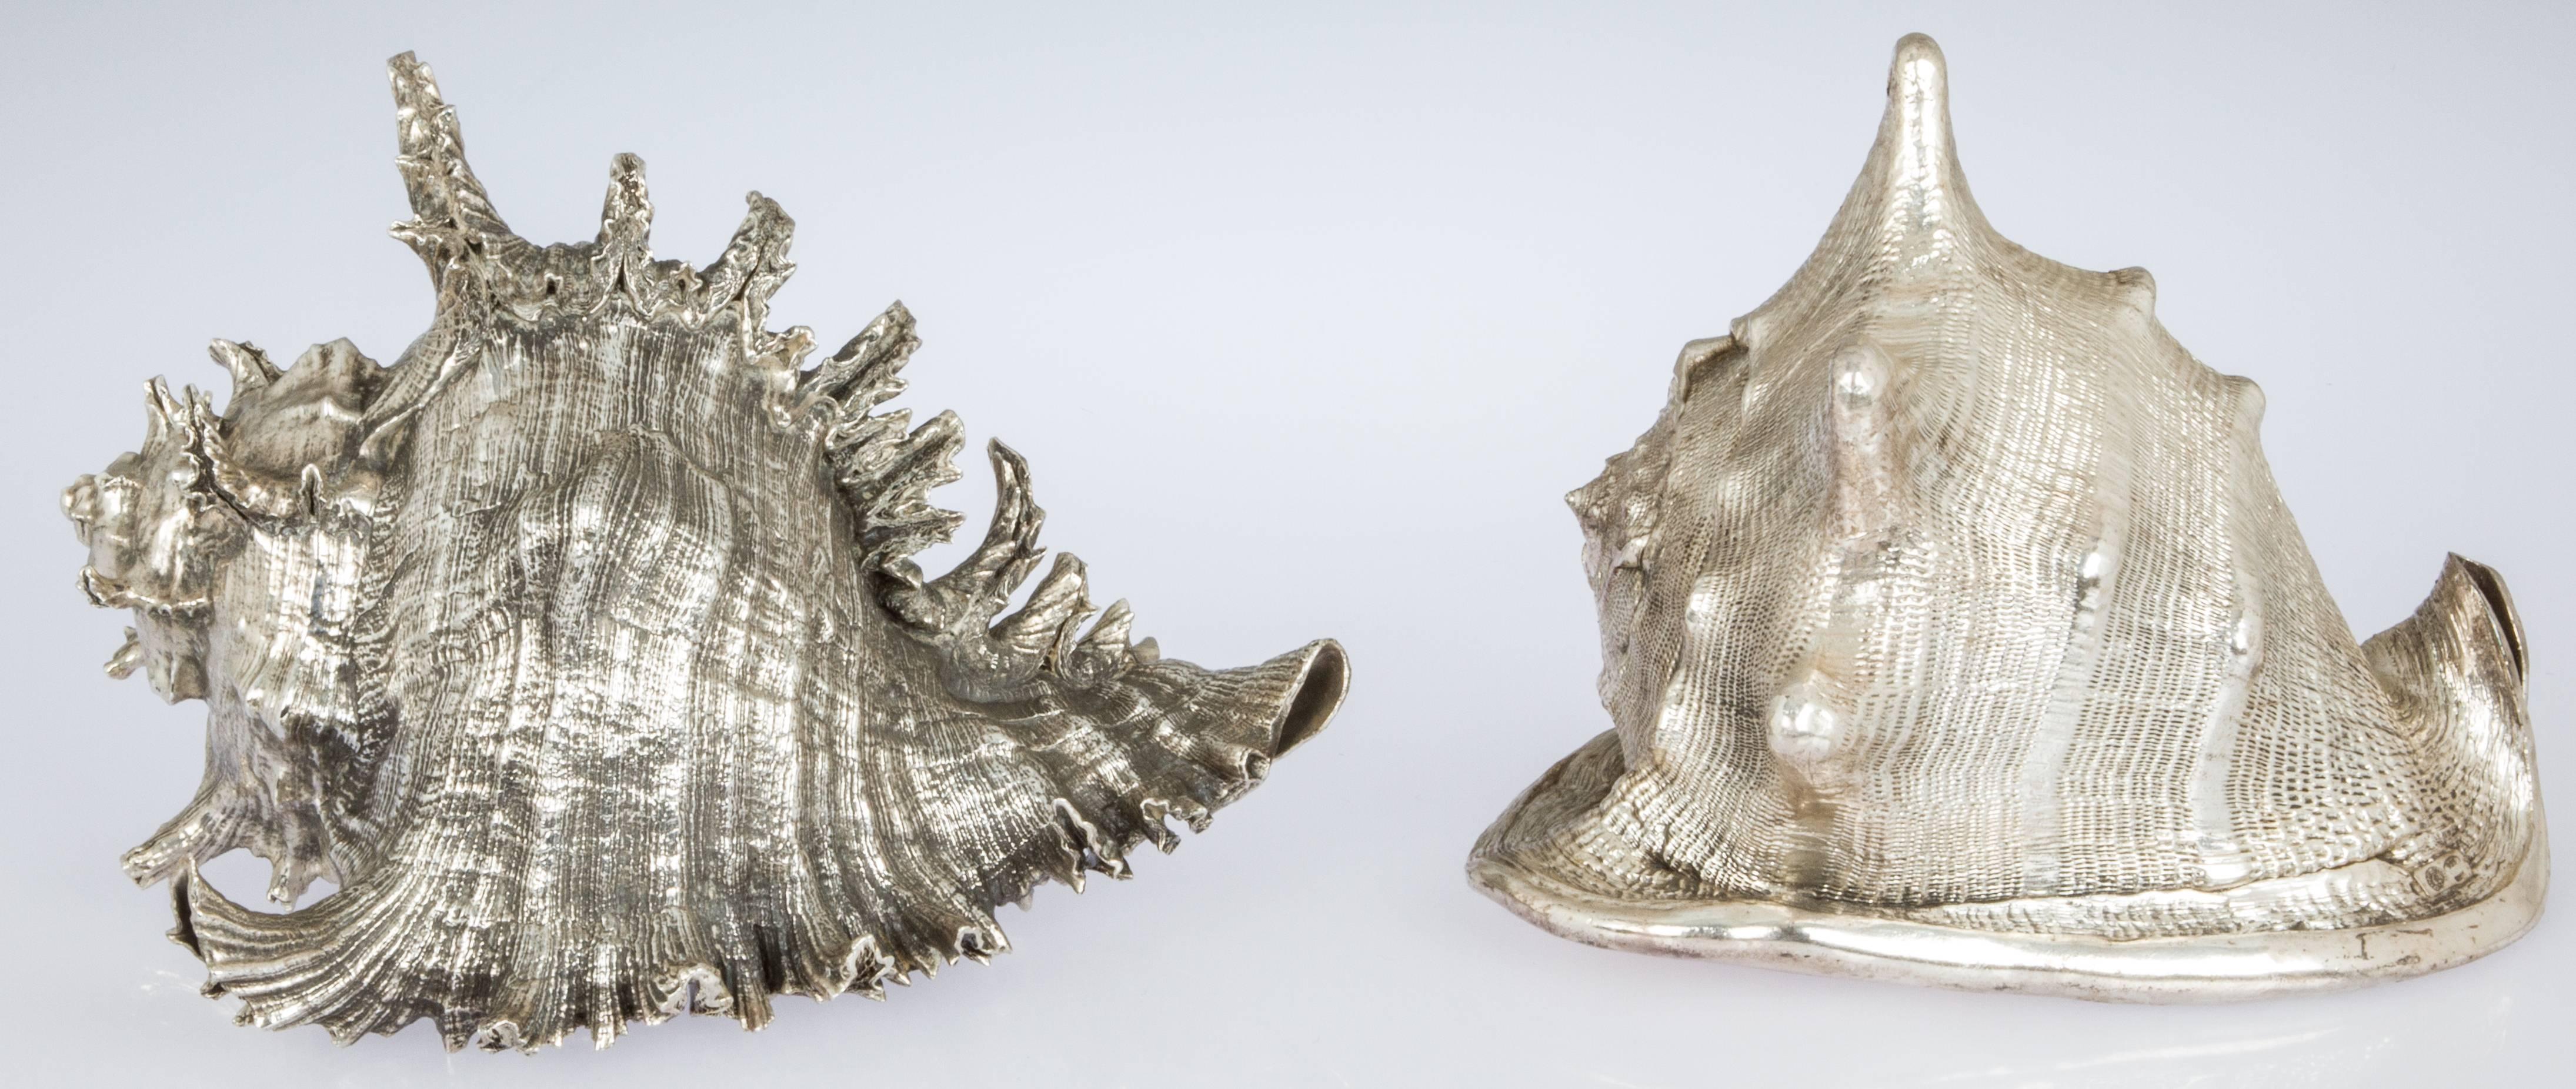 These are beautiful, finely detailed sterling silver-clad shells. 

The Helmut shell is 6